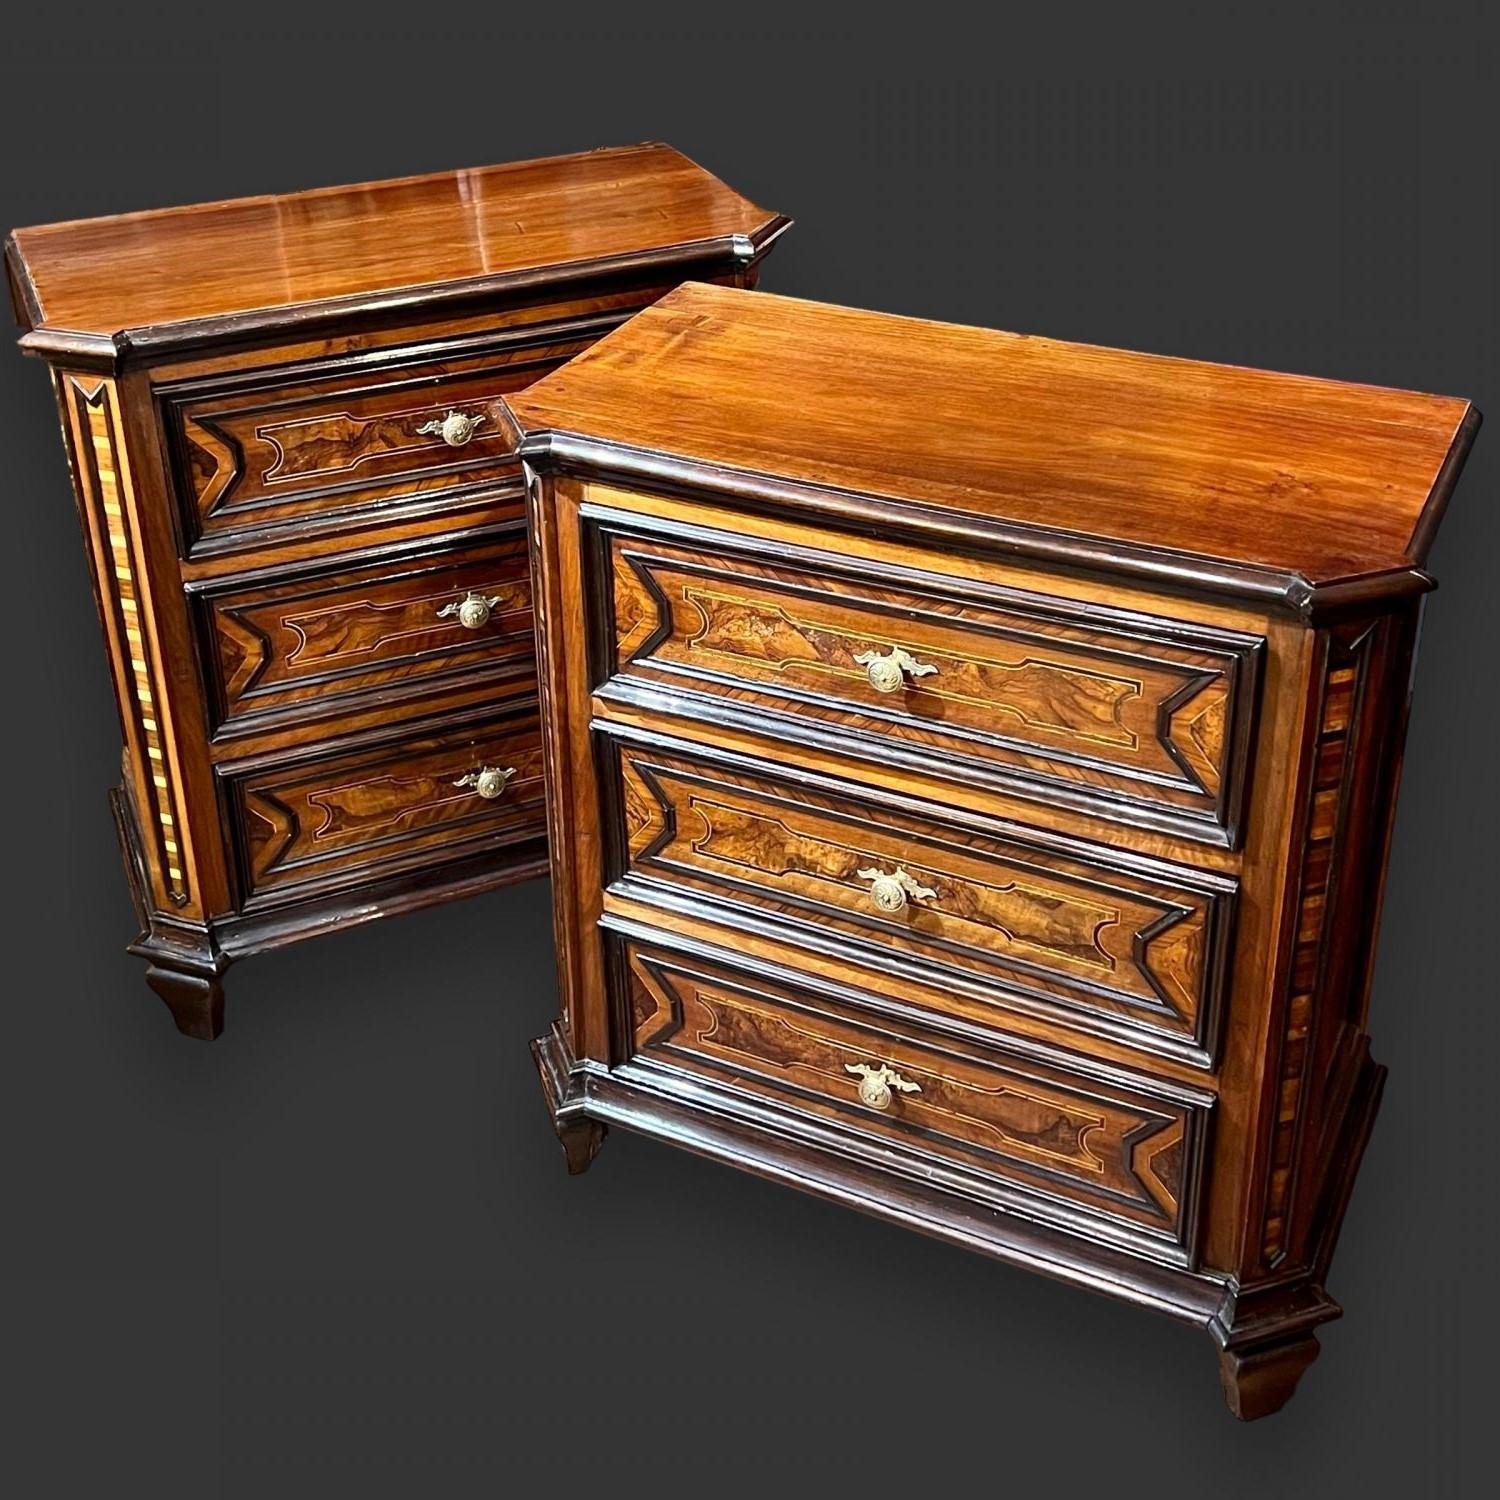 Pair of small 18th century Northern Italian inlaid chest of drawers. Three drawers with inlaid fronts. Striped inlaid detail to the canted corners above carved feet.
